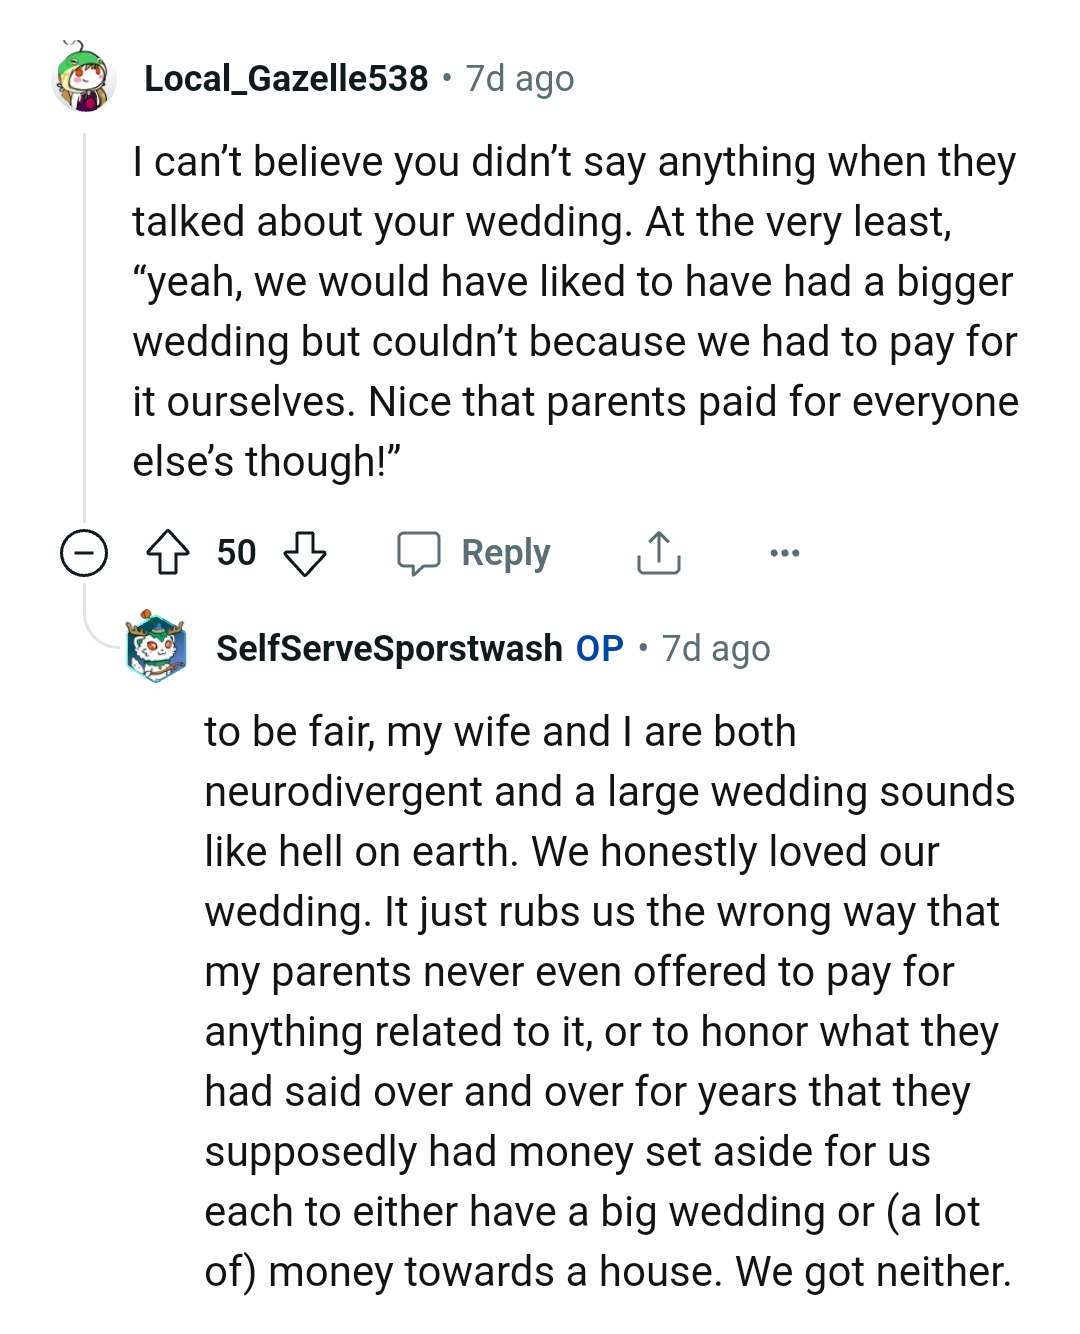 The OP and his wife are both neurodivergent